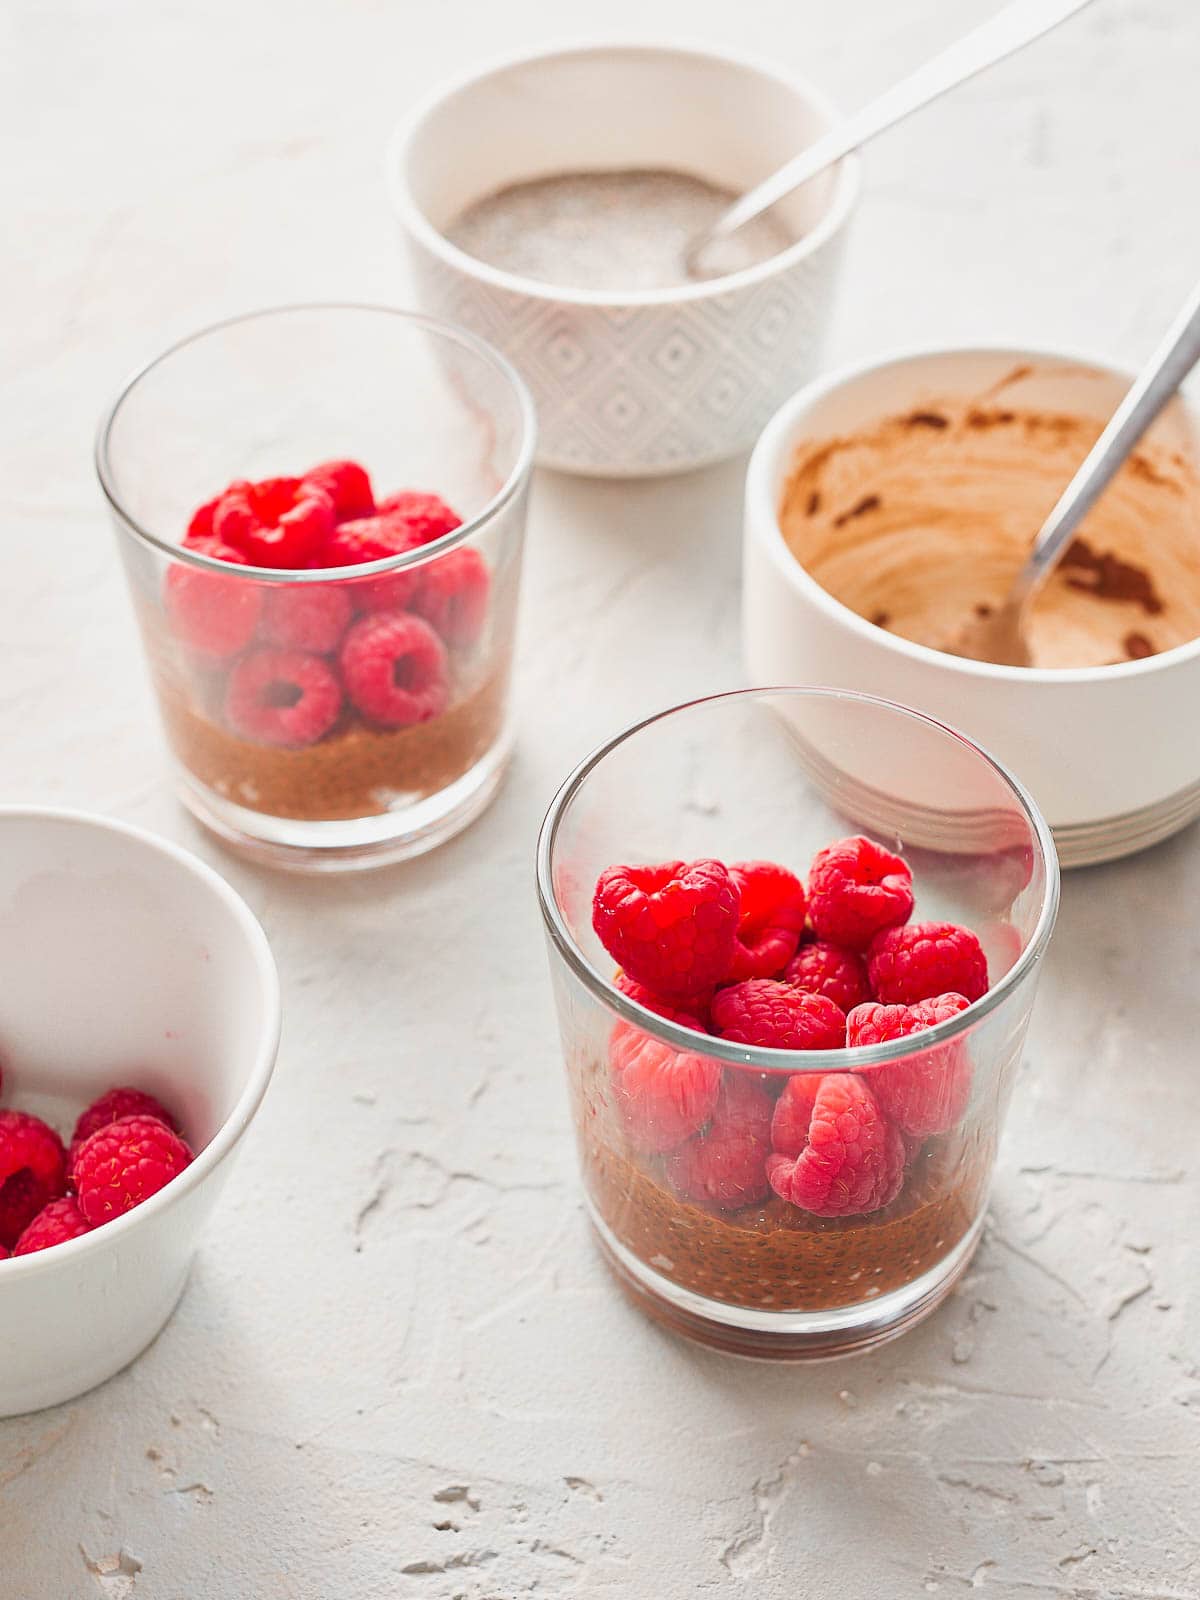 Adding raspberries on top of the chia pudding